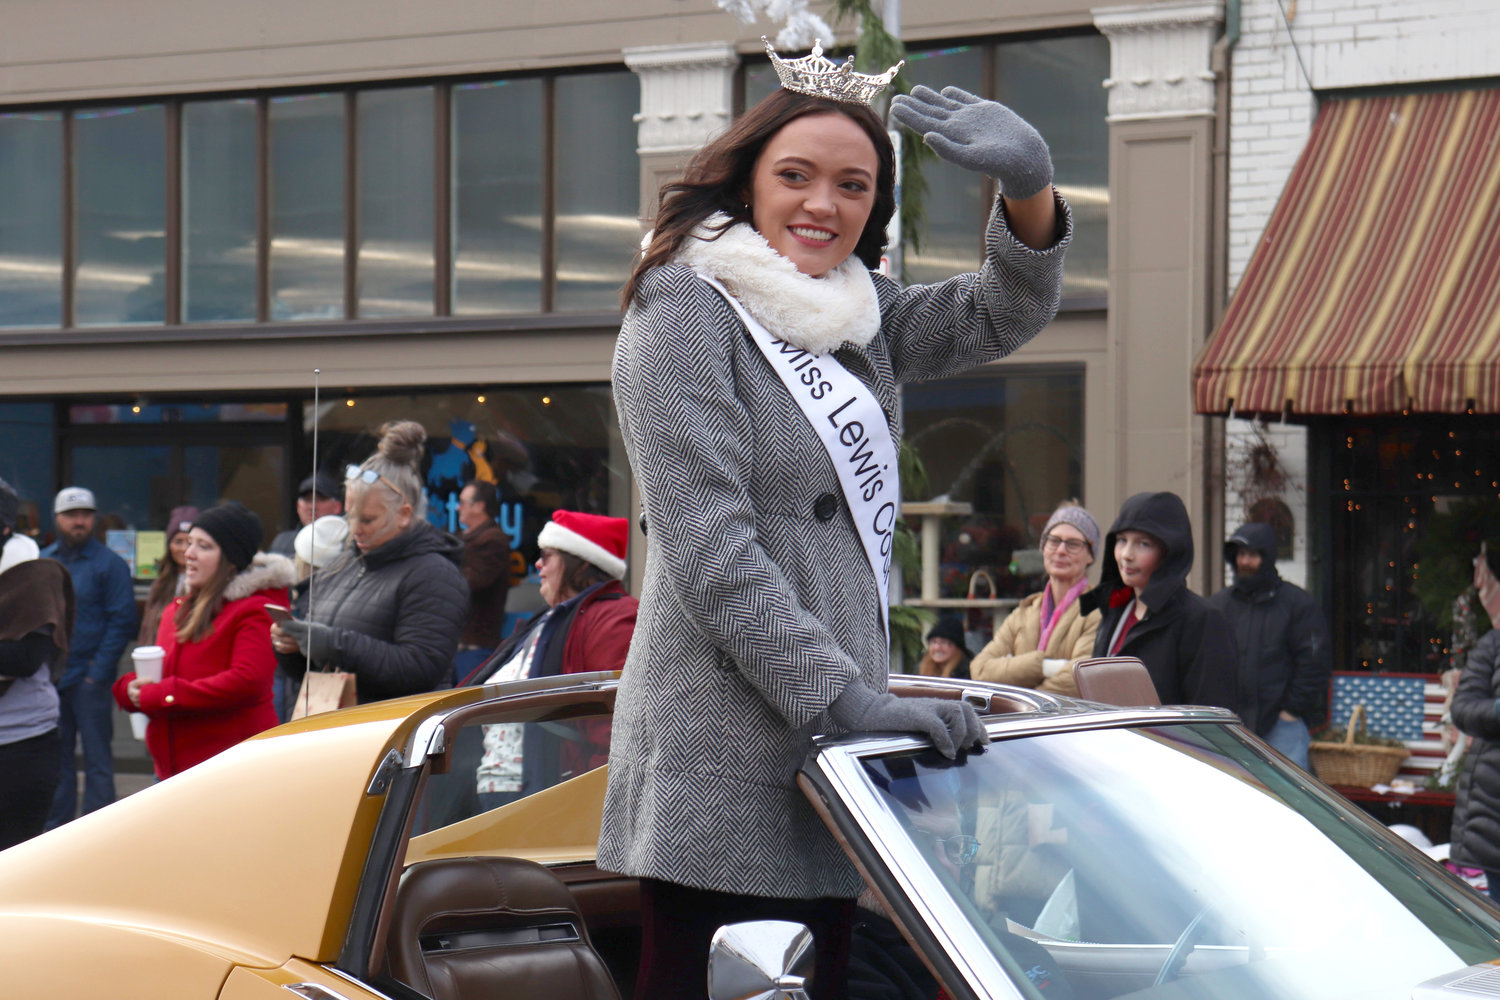 Miss Lewis County 2022 Briana Rasku waves from a car during the Santa Parade in downtown Chehalis on Saturday.